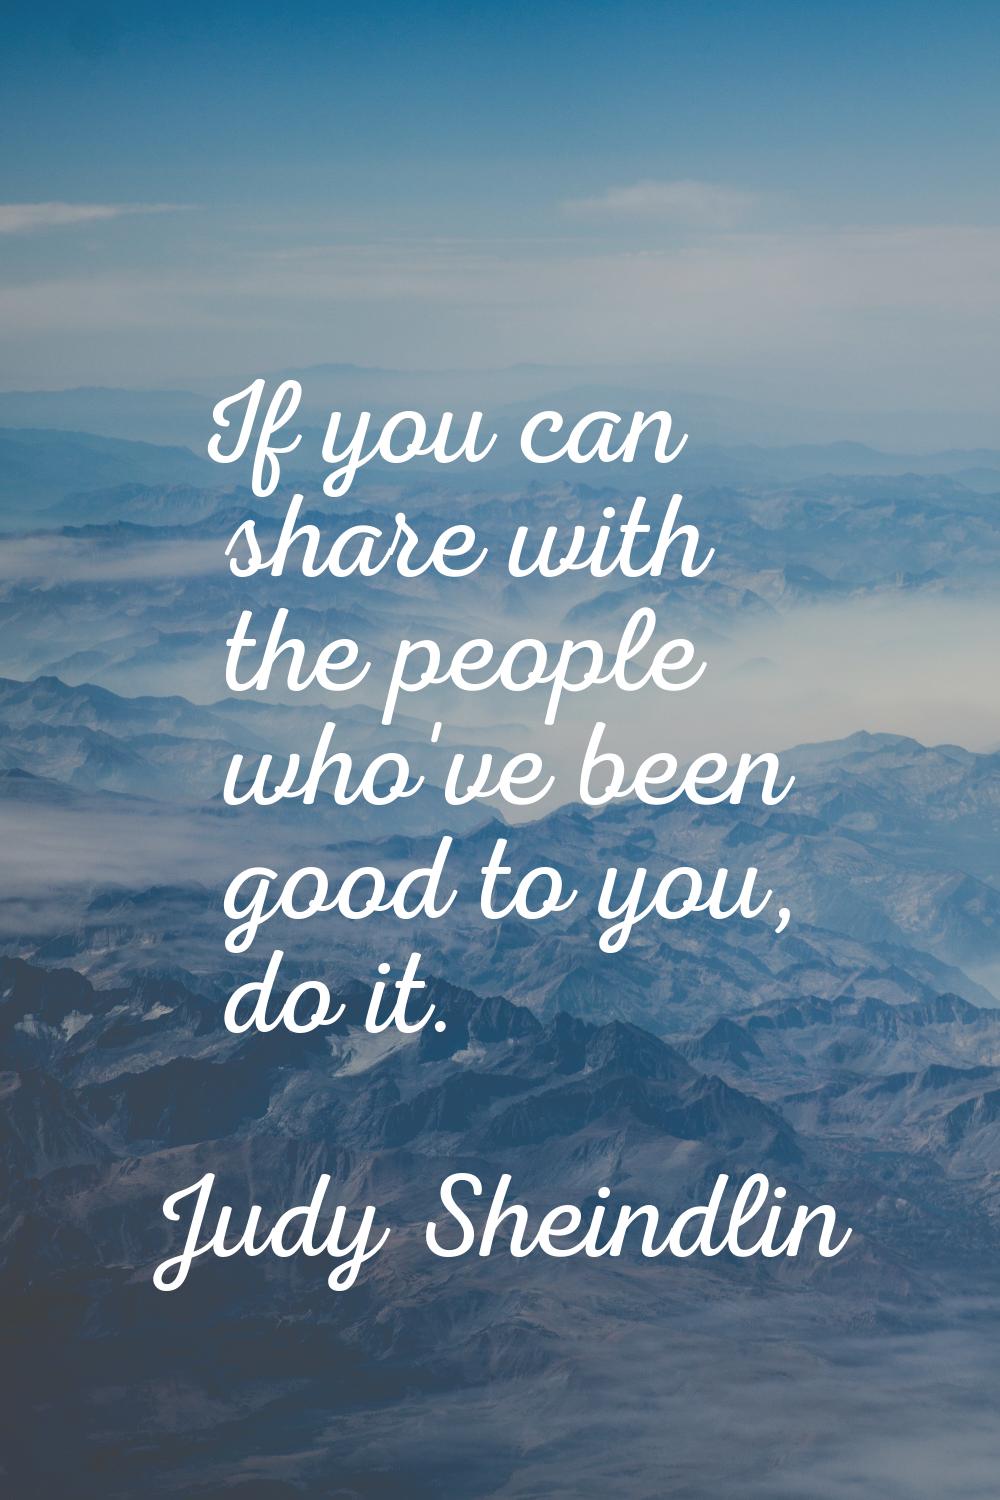 If you can share with the people who've been good to you, do it.